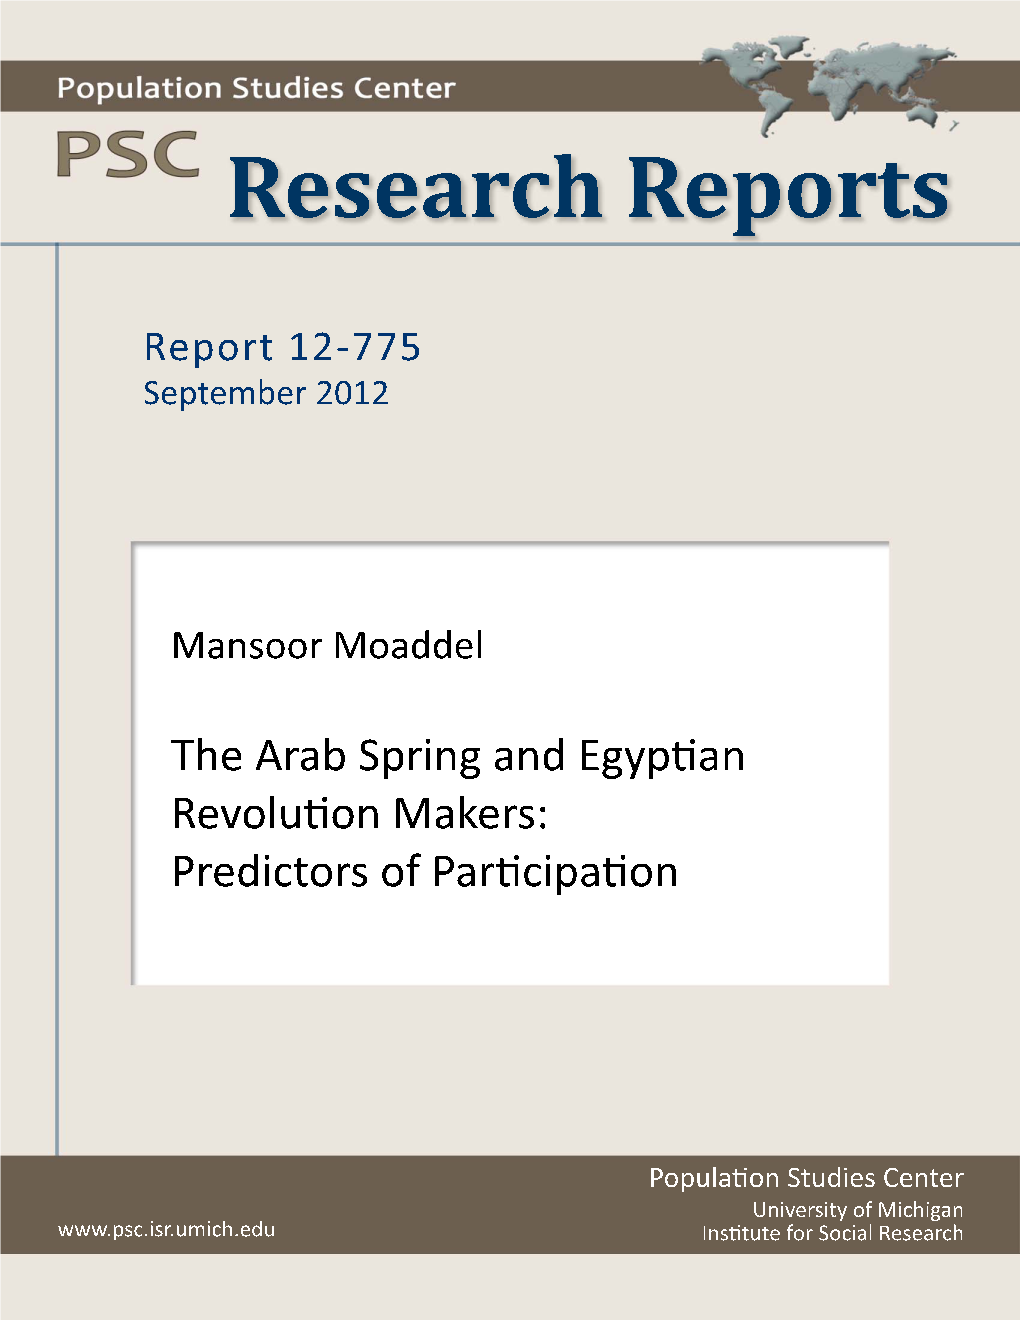 The Arab Spring and Egyptian Revolution Makers: Predictors of Participation